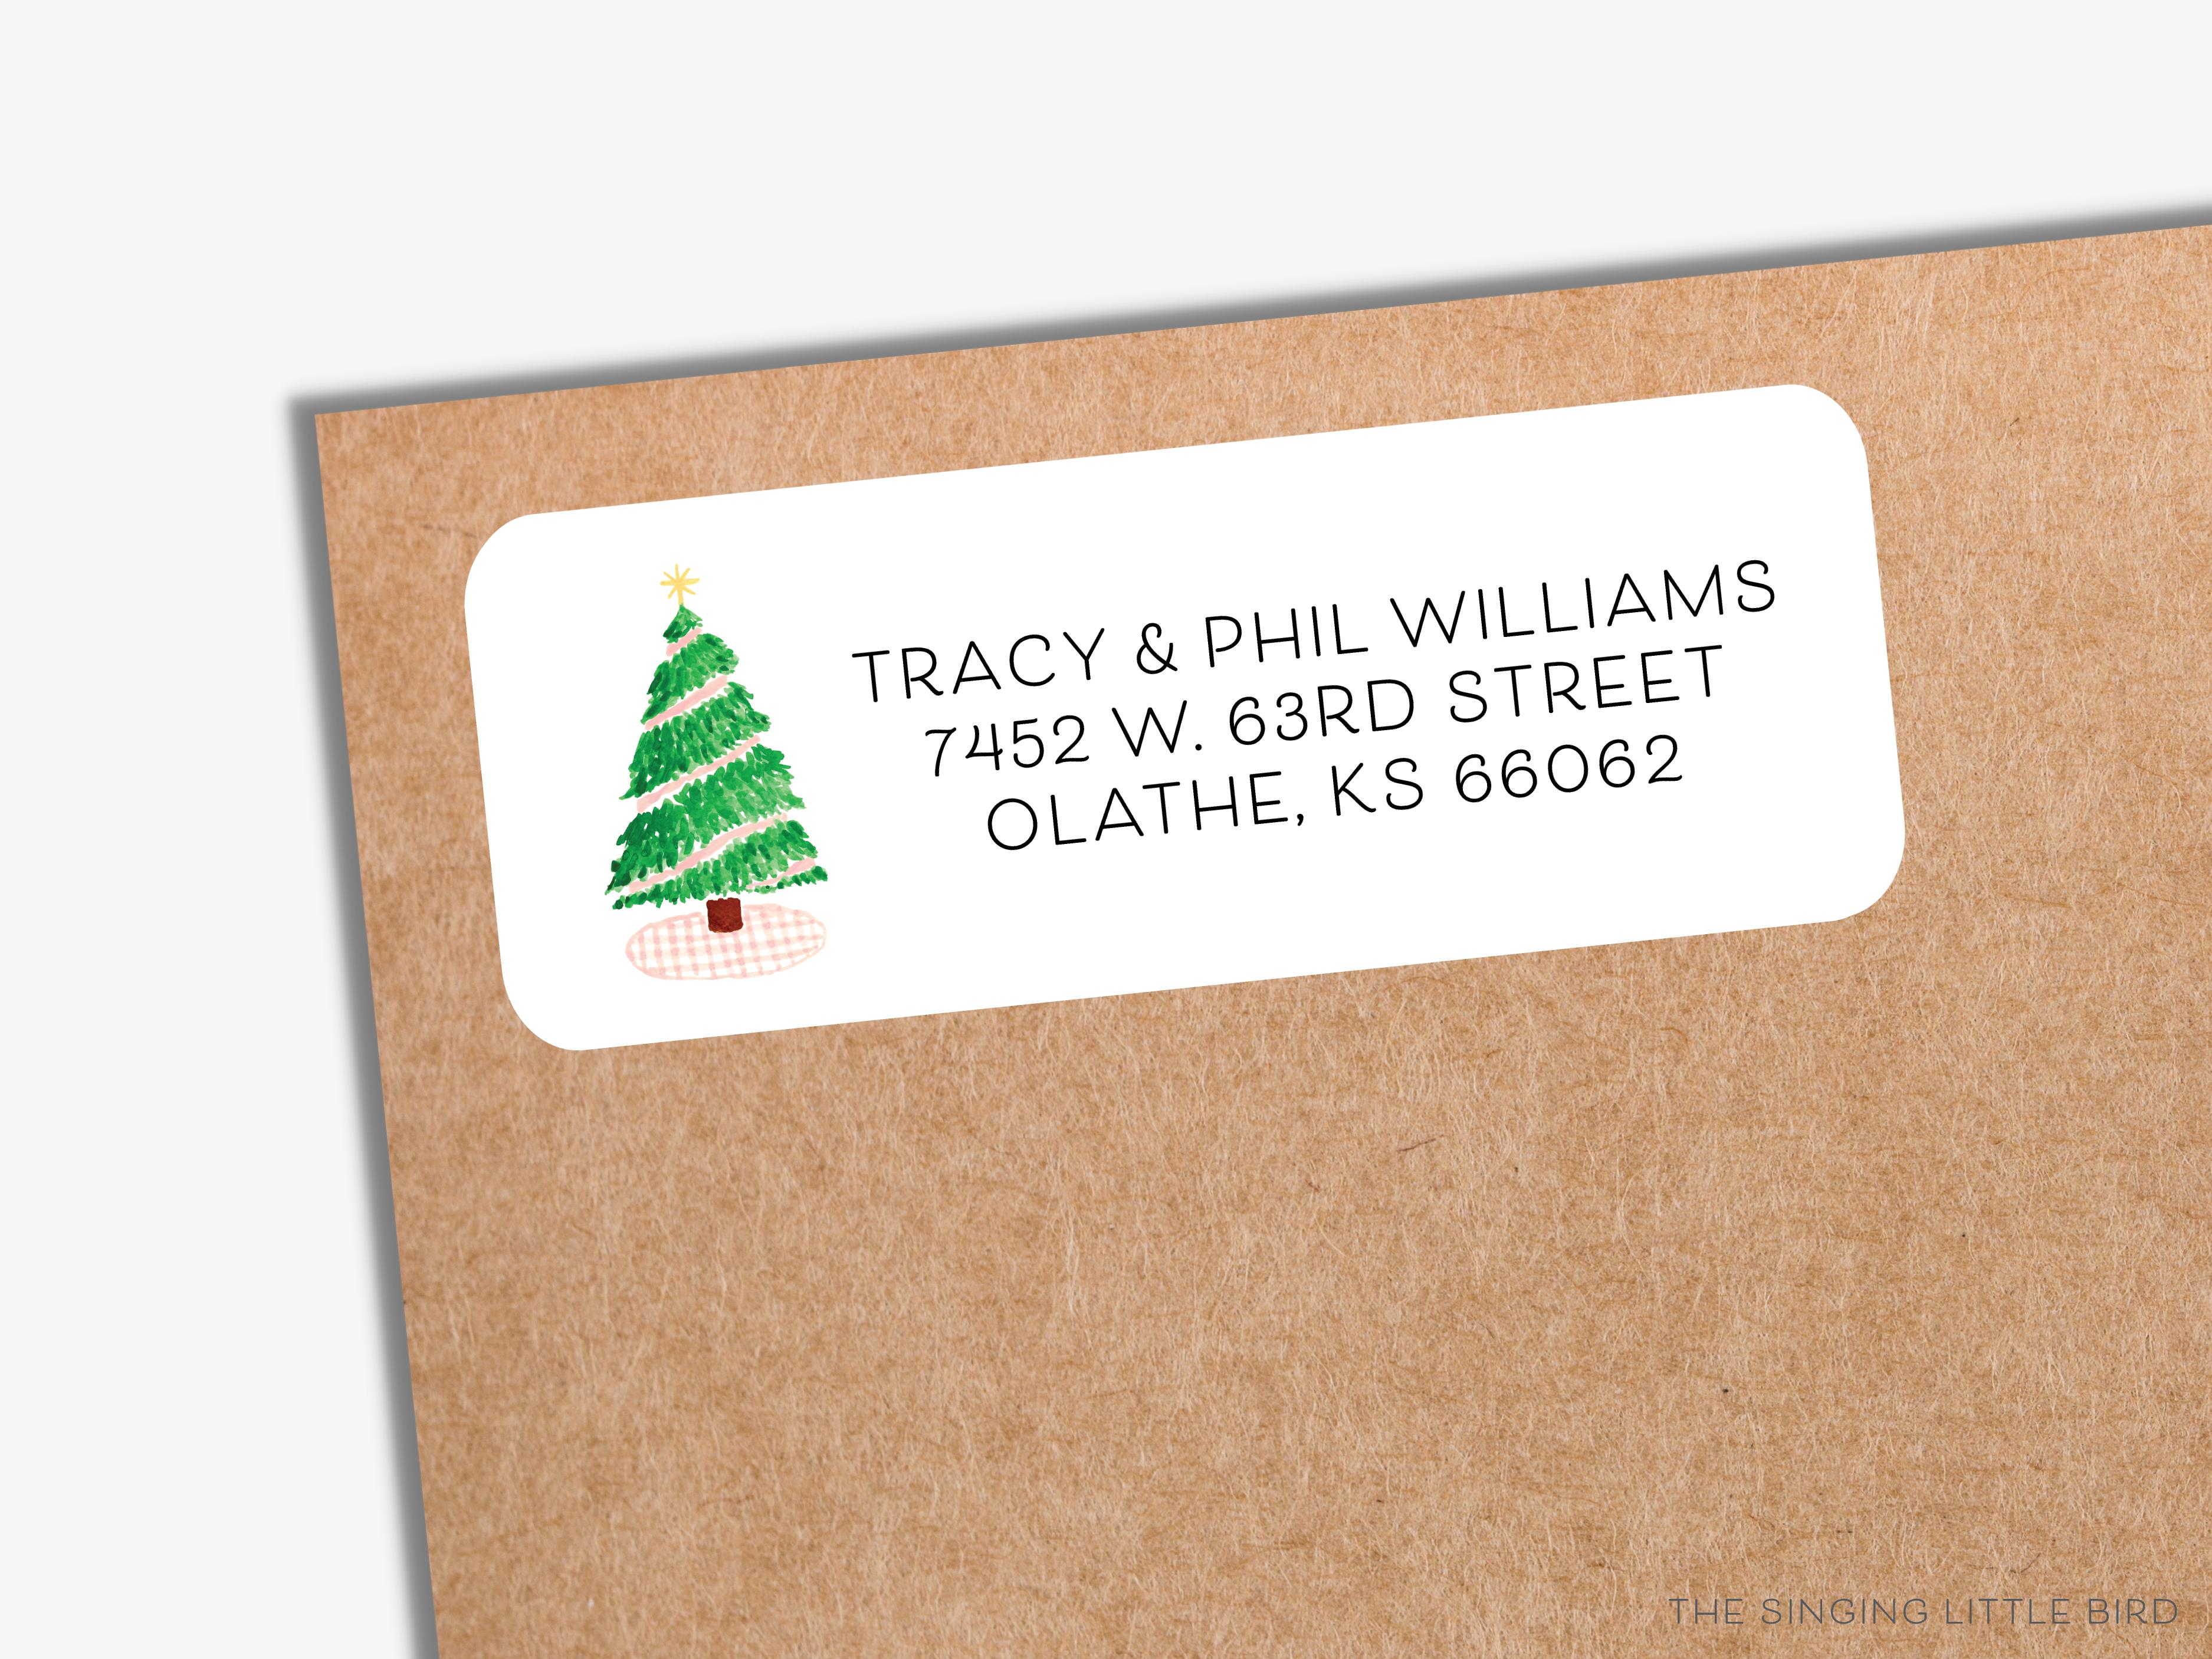 Pink Gingham Christmas Tree Return Address Labels-These personalized return address labels are 2.625" x 1" and feature our hand-painted watercolor Christmas Tree and Pink Gingham, printed in the USA on beautiful matte finish labels. These make great gifts for yourself or the Christmas tree lover.-The Singing Little Bird